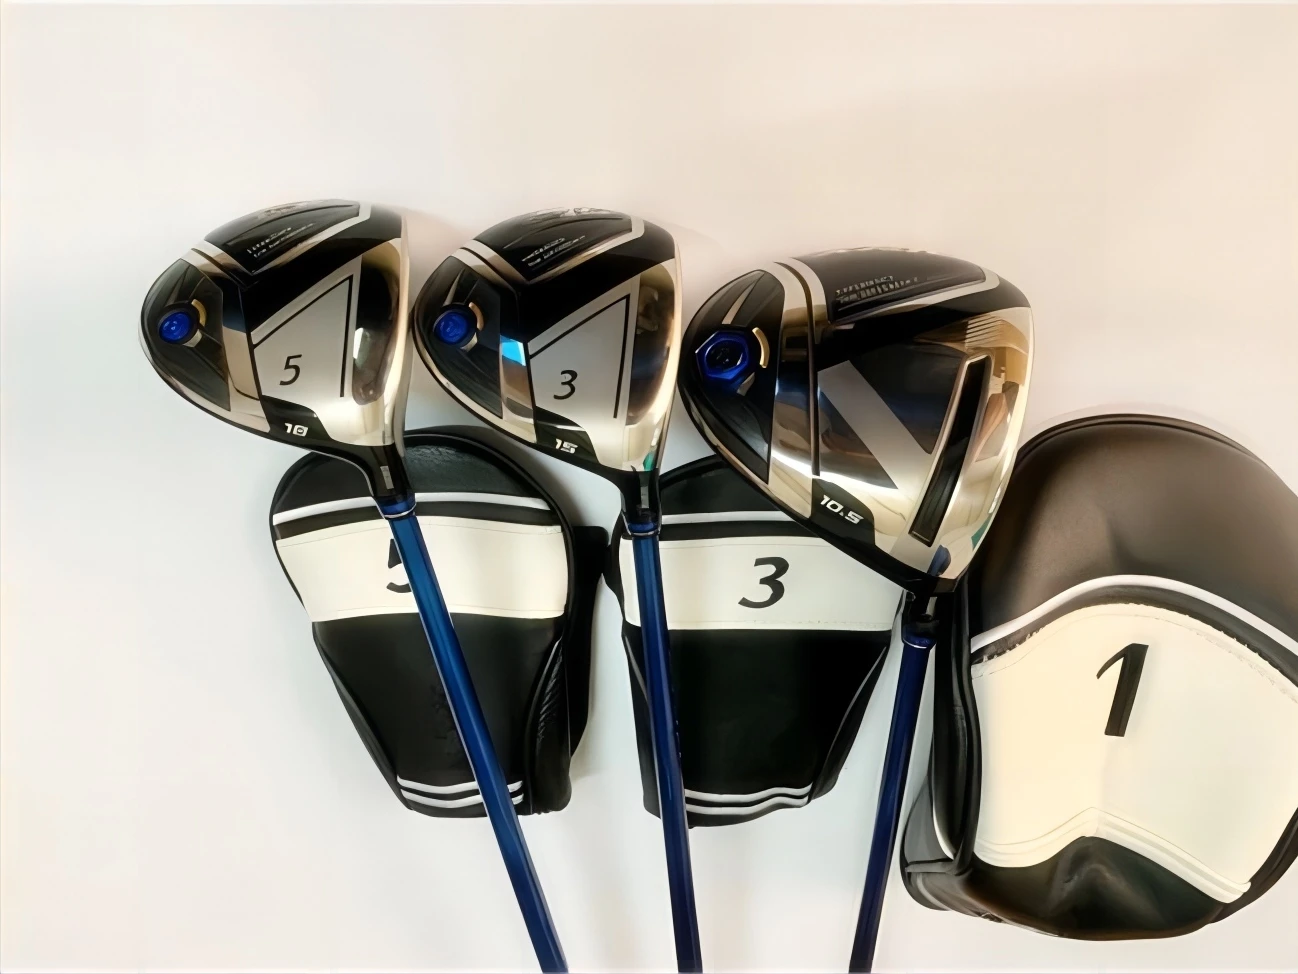 

Brand New MP1100 Full Set MP1100 Golf Clubs Driver + Fairway Woods R/S/SR Flex Graphite Shaft Head Cover Included